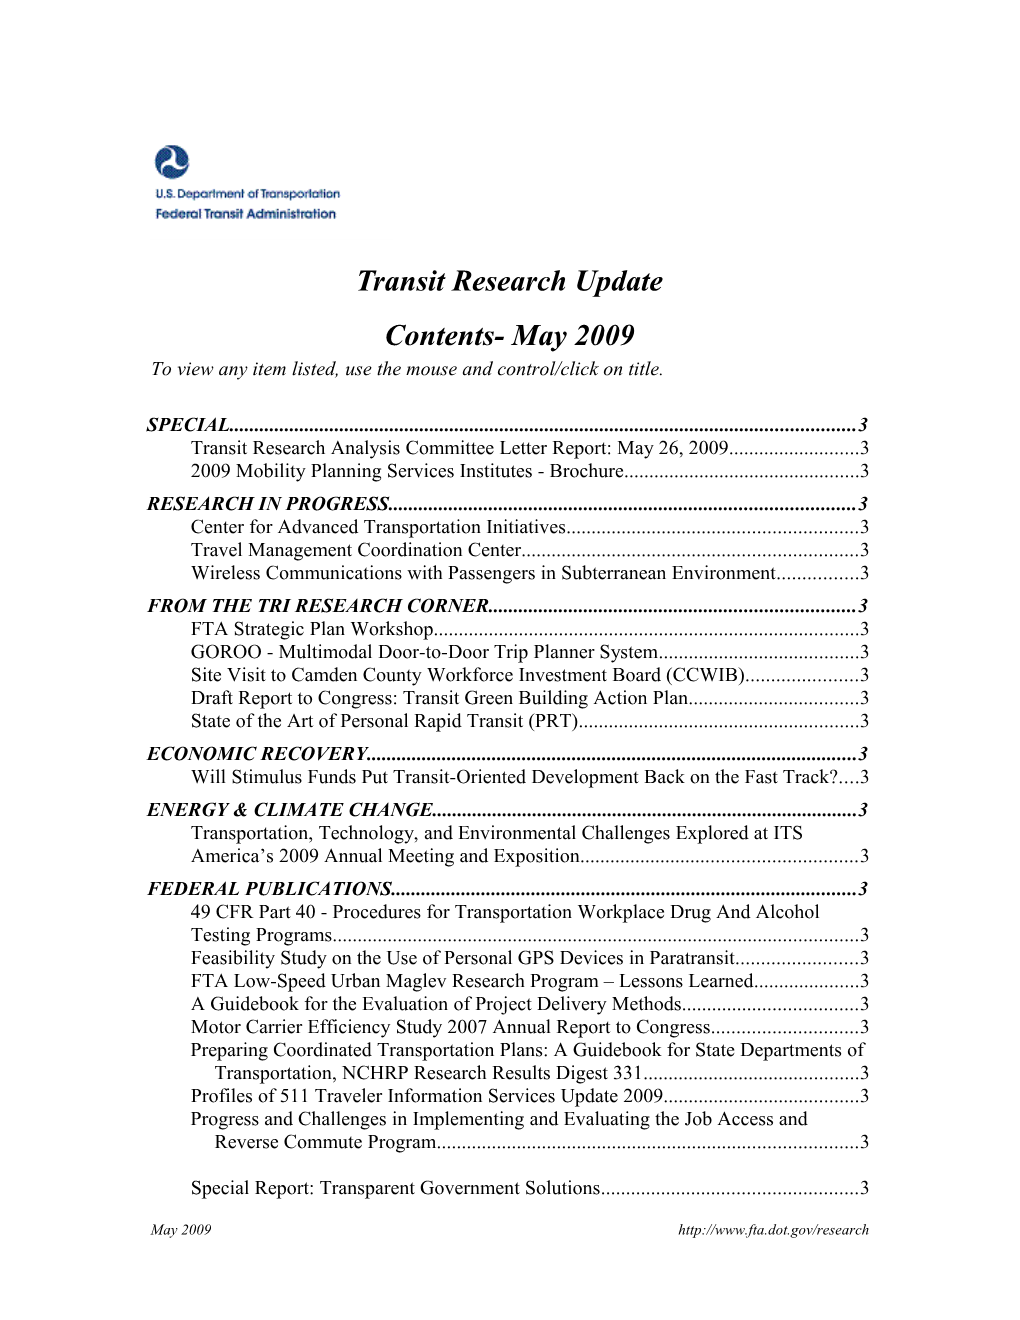 May 2009 Transit Research Update